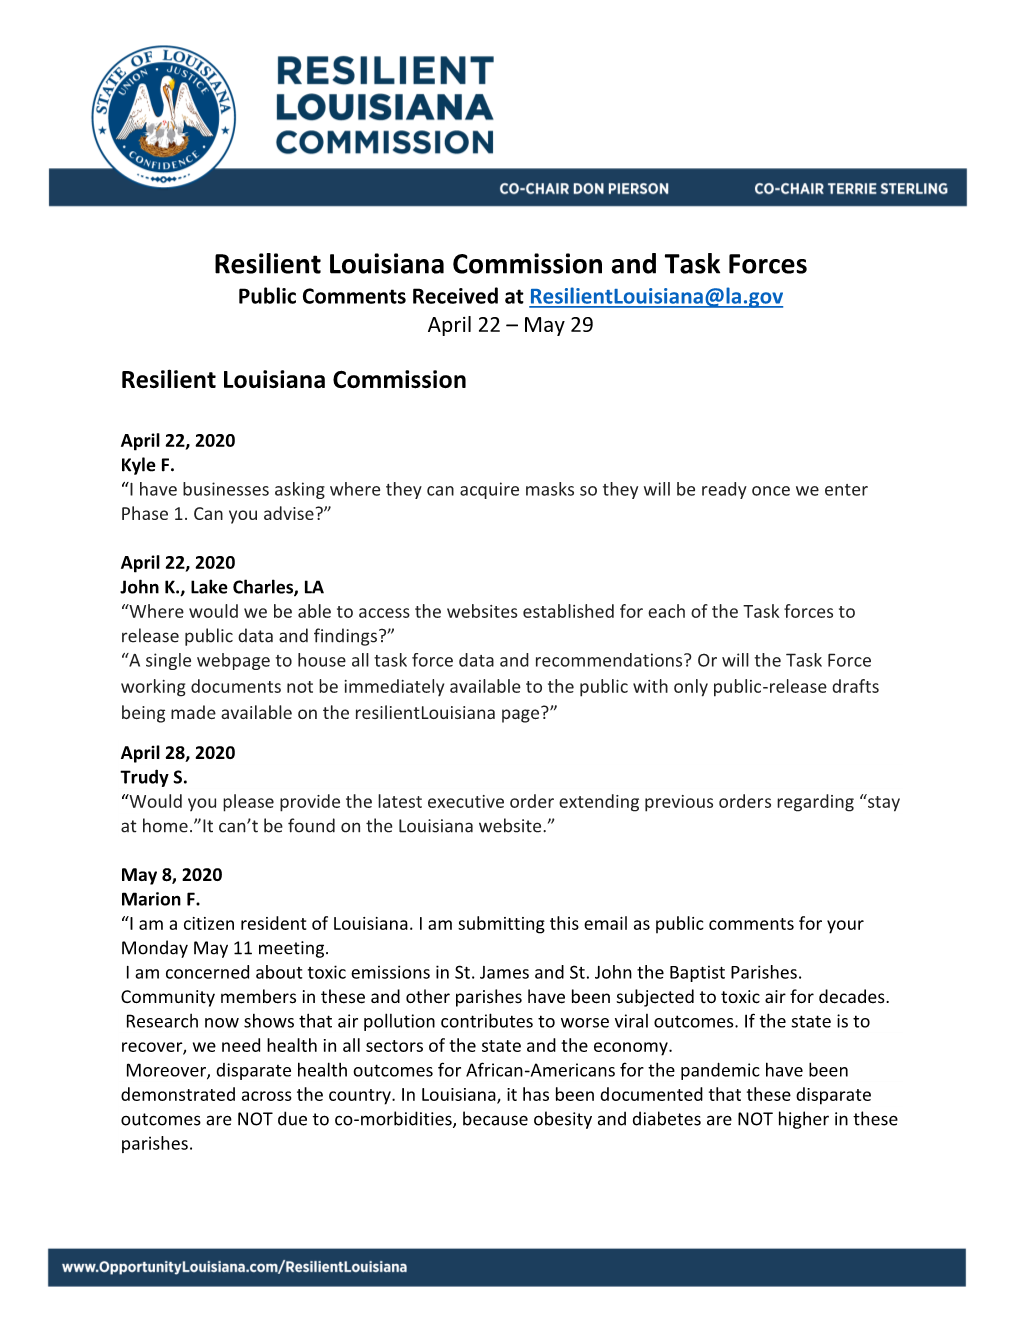 Resilient Louisiana Commission and Task Forces Public Comments Received at Resilientlouisiana@La.Gov April 22 – May 29